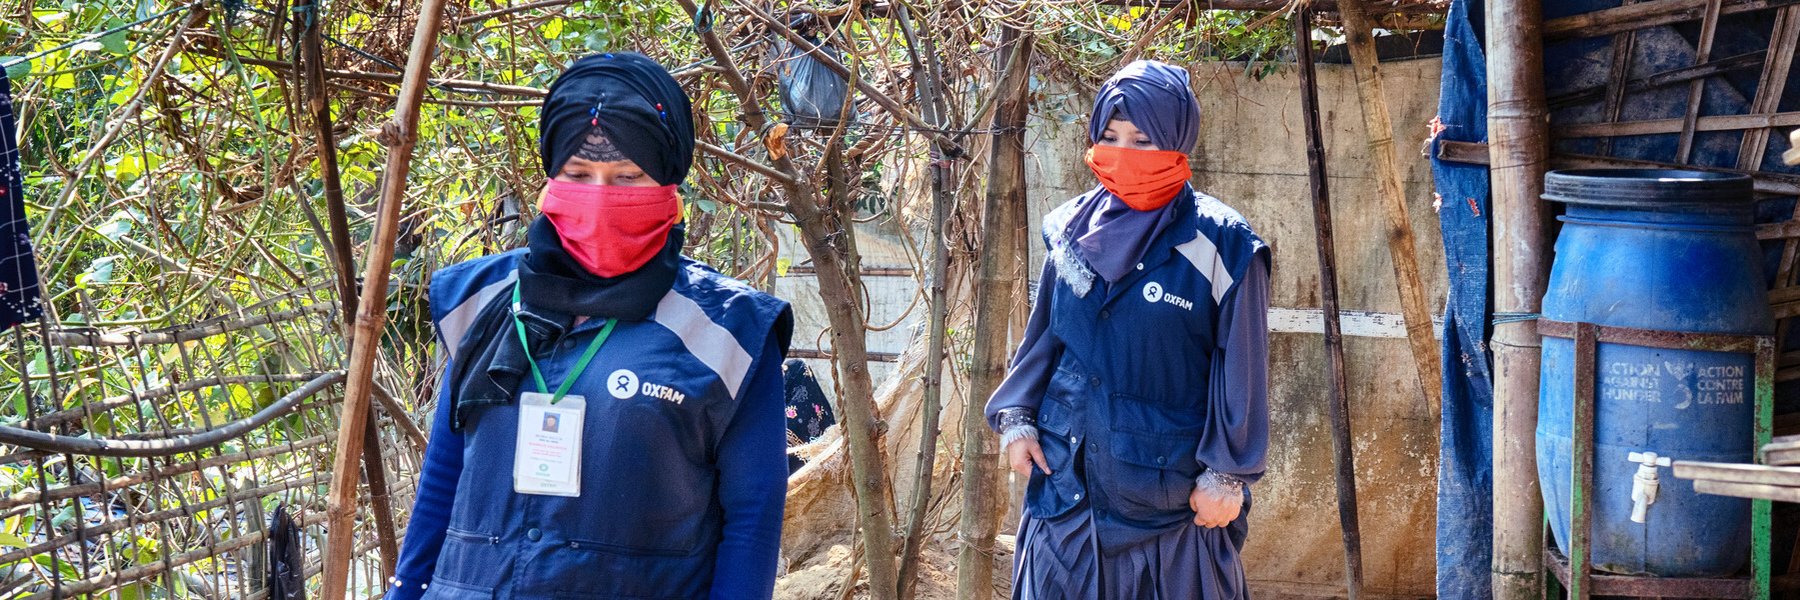 Oxfam volunteers Rejuana (left) and Monira, who work in the refugee camps at Cox's Bazar, Bangladesh.